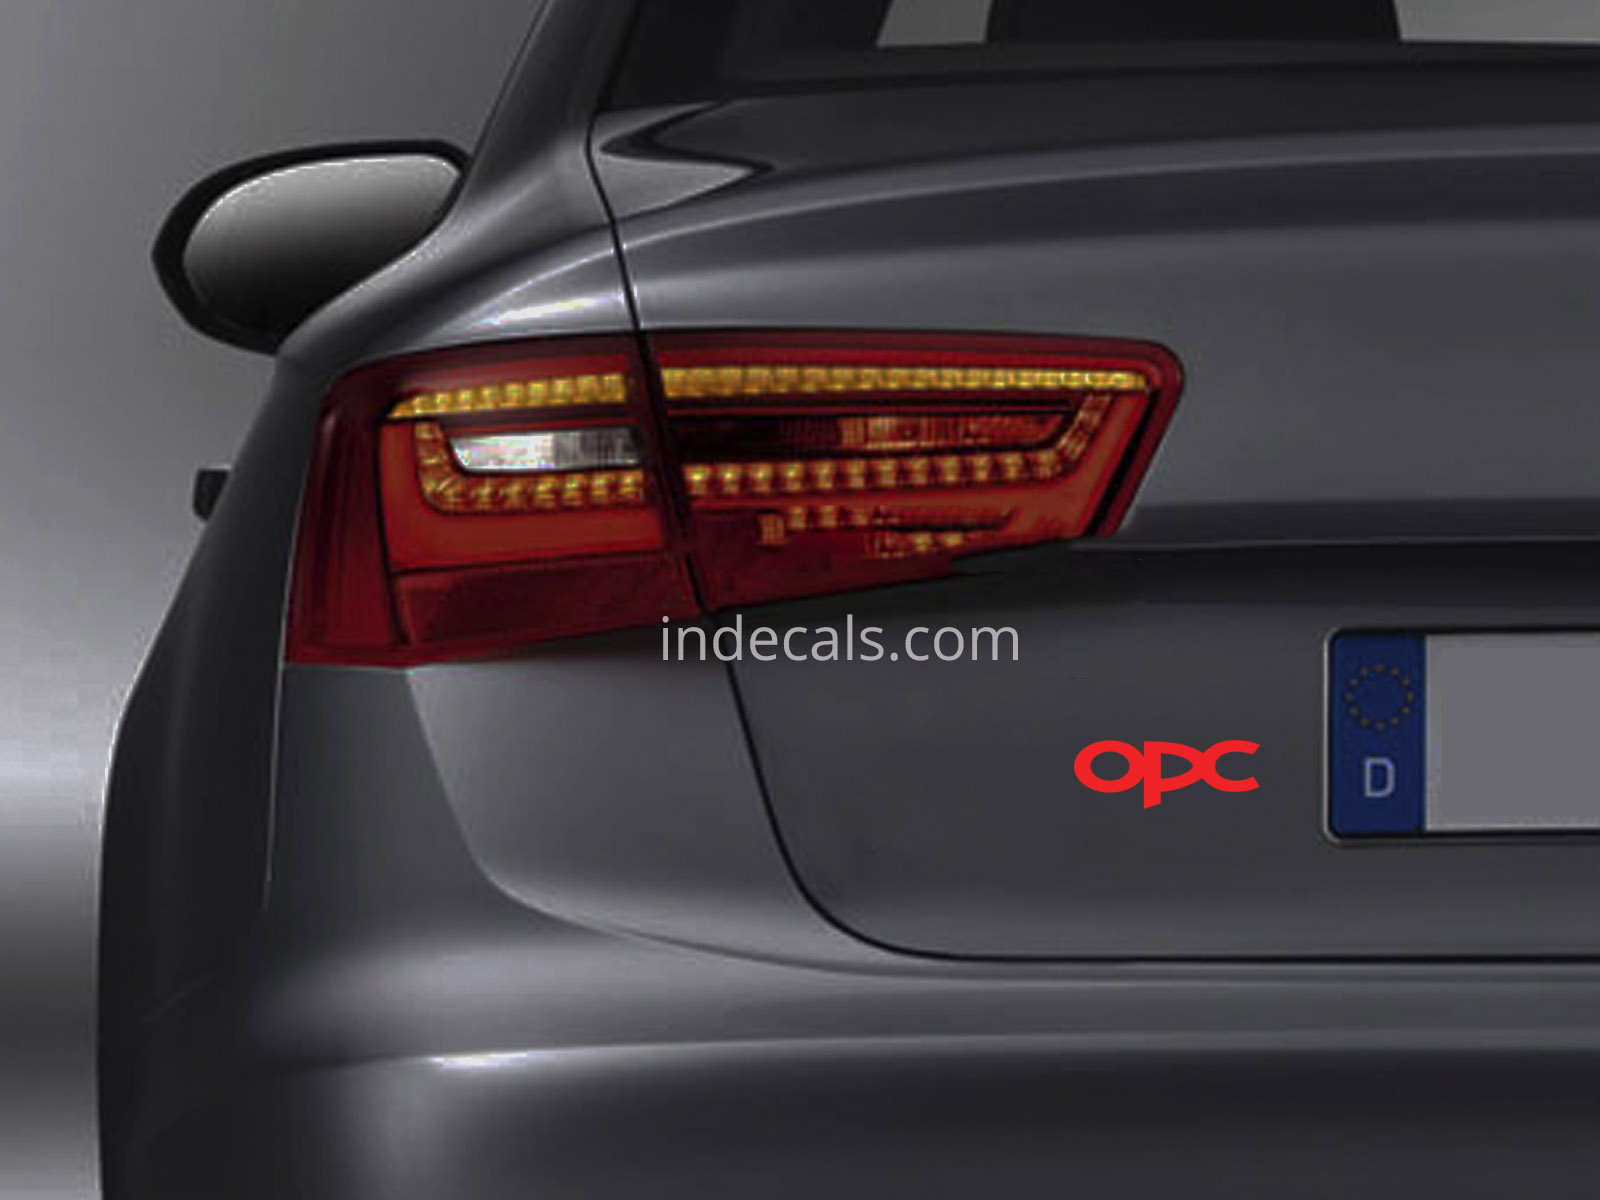 3 x Opel OPC Stickers for Trunk - Red